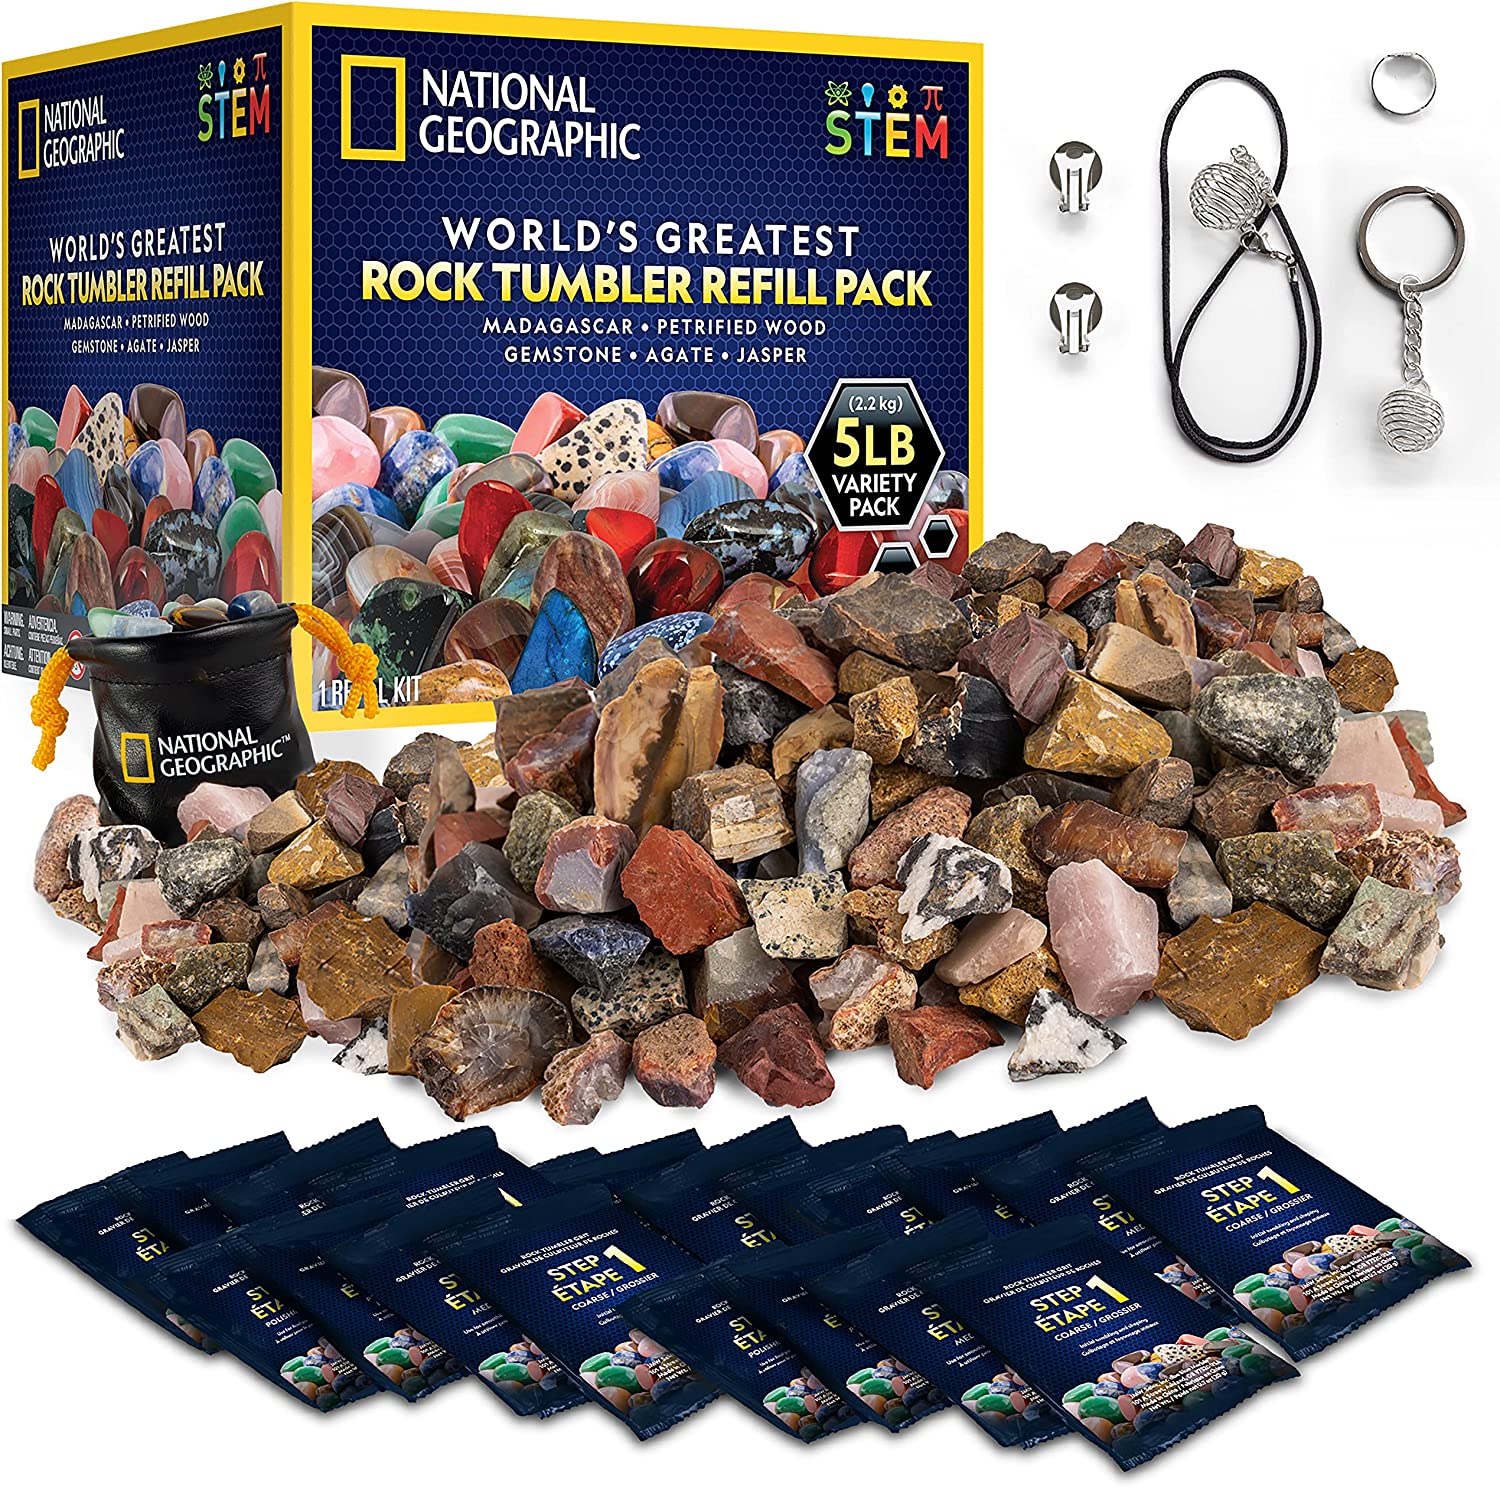 10 lbs Large Weight 4 Step Rock Tumbler Grit Kit, Tumbling Media Refill - Coarse/Medium/Pre-Polished/Final Polish Grit Works with Any Rock Tumbler